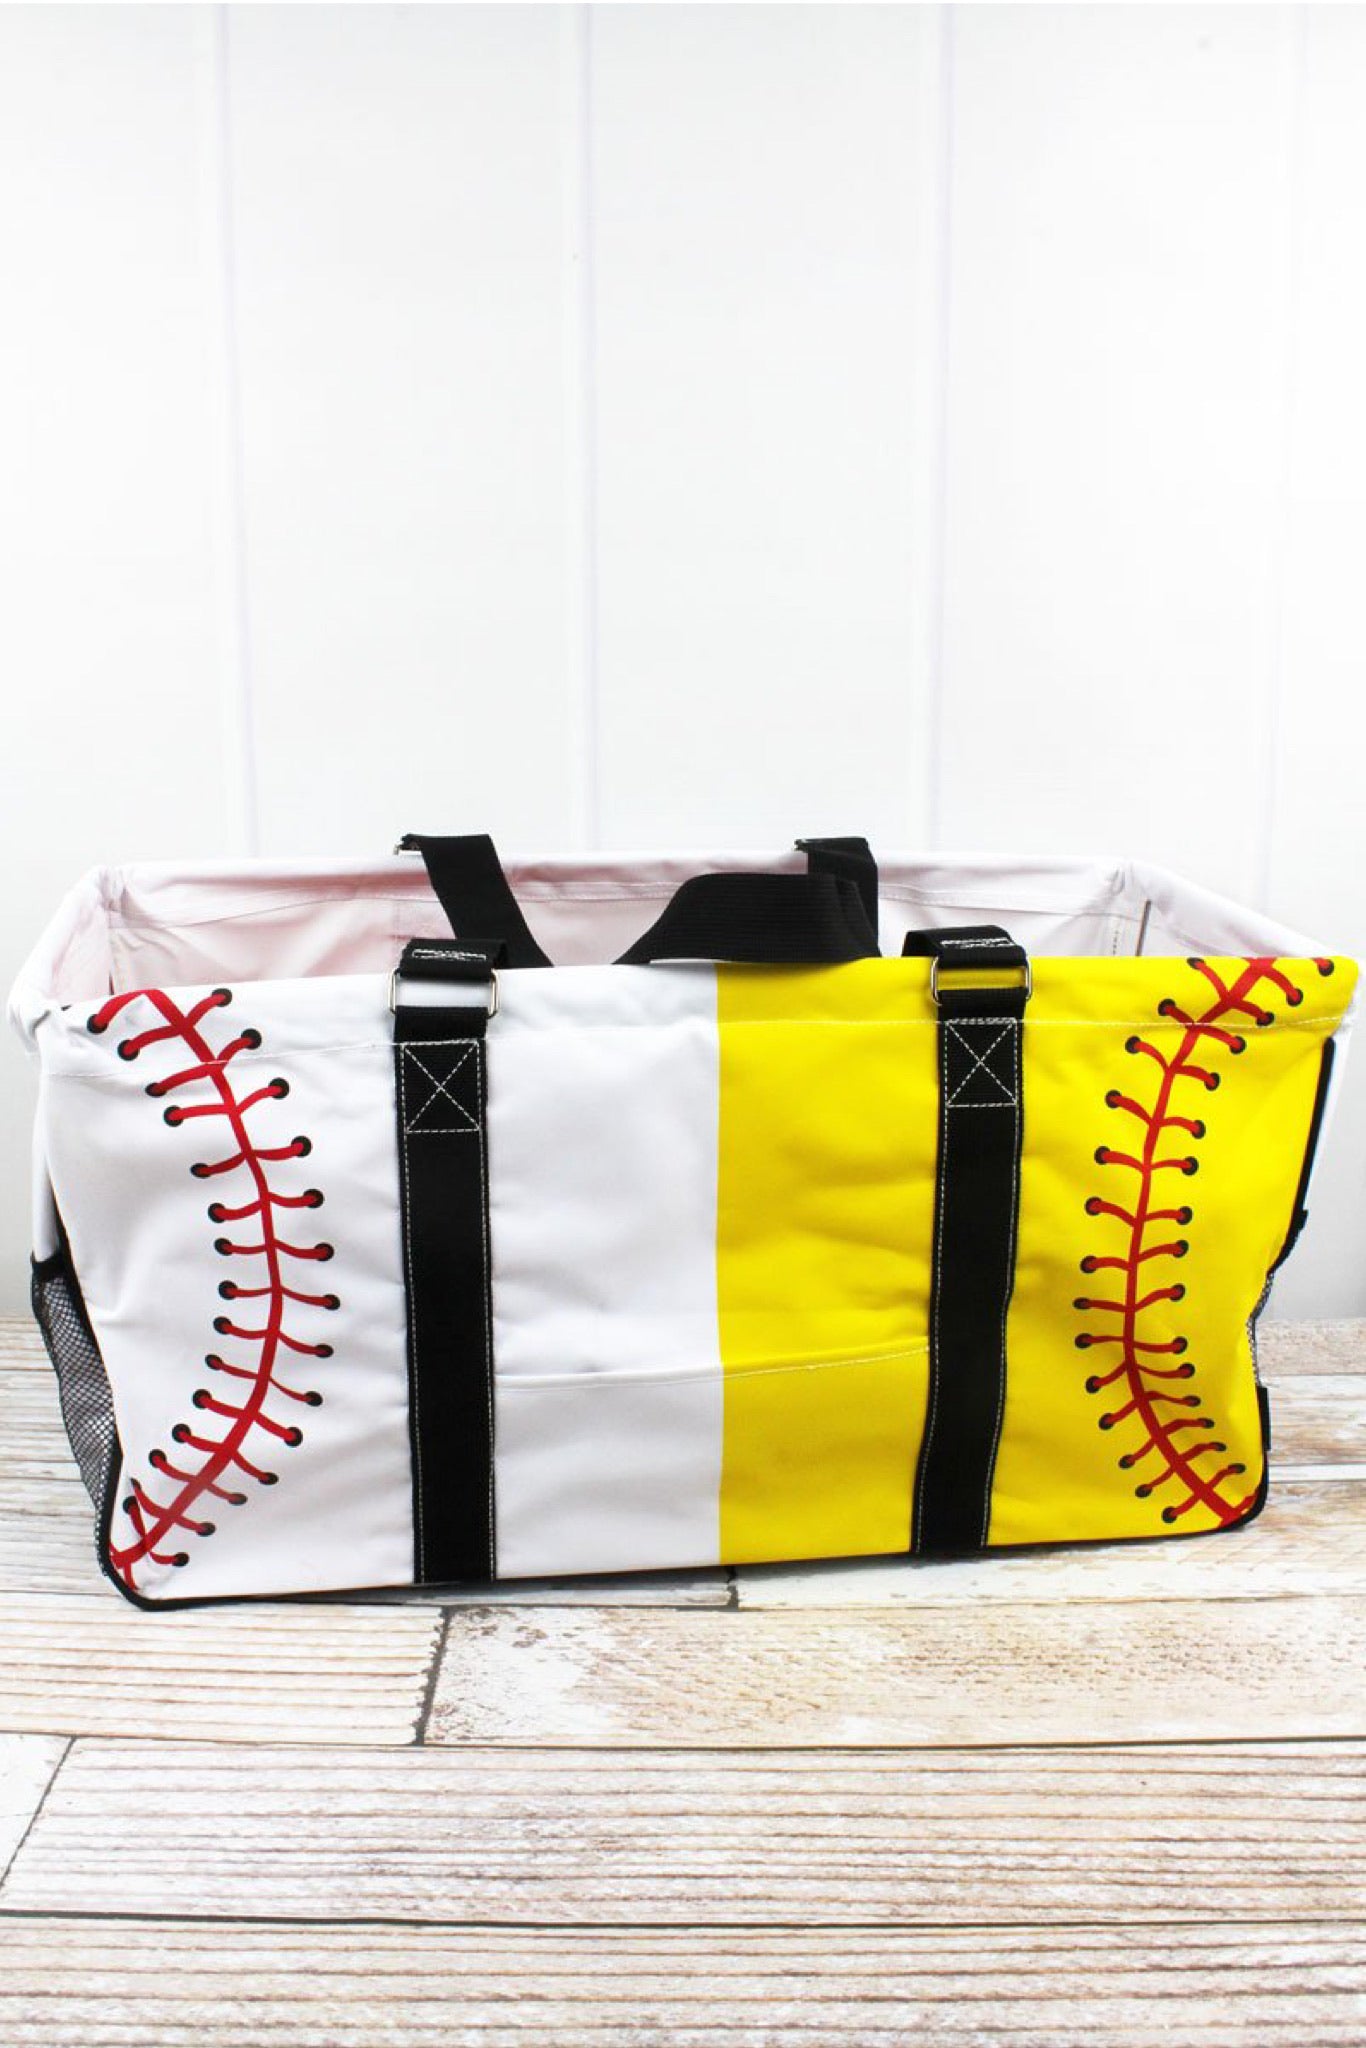 Split Baseball & Softball Laces Collapsible Haul-It-All Basket with Mesh Pockets